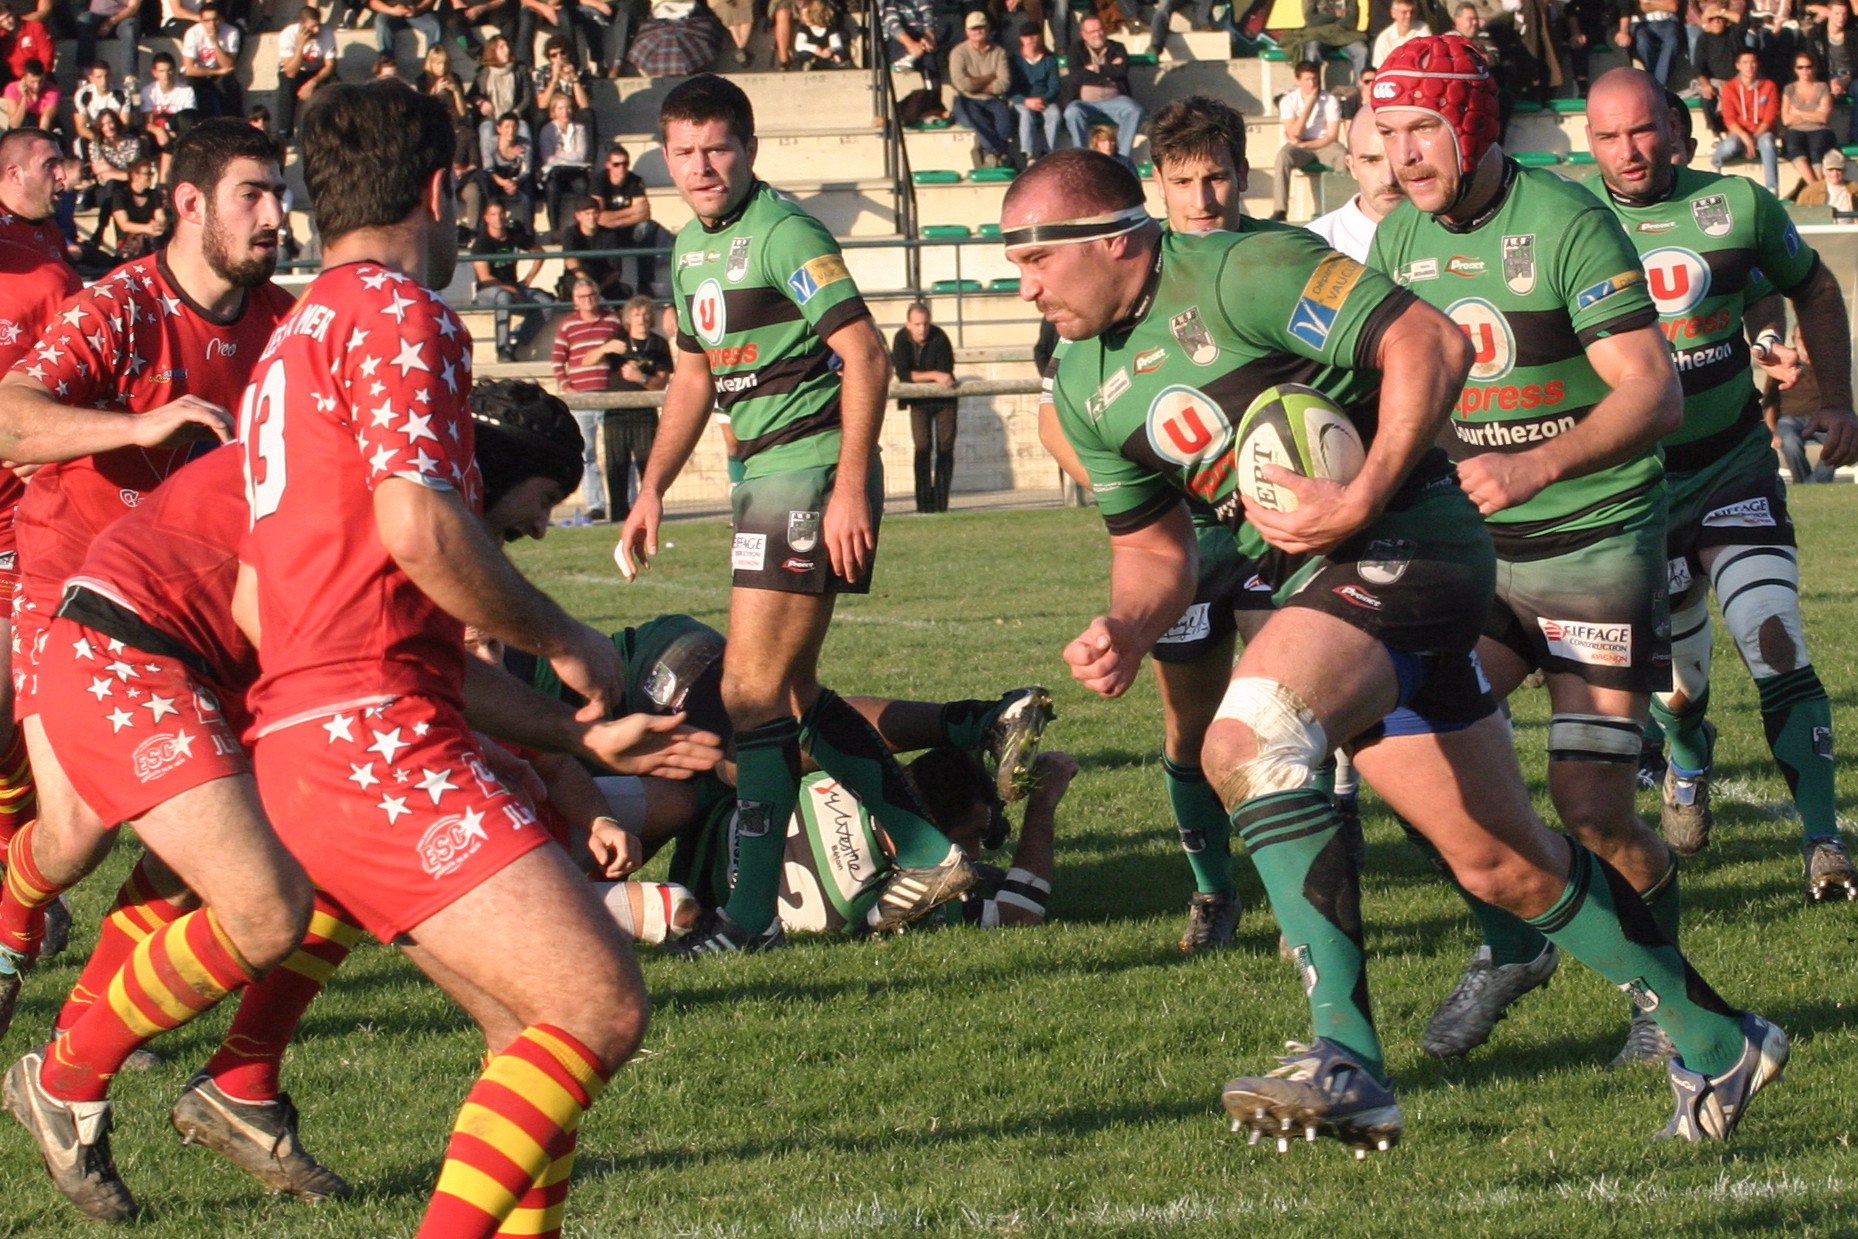 the men in red and green are playing rugby